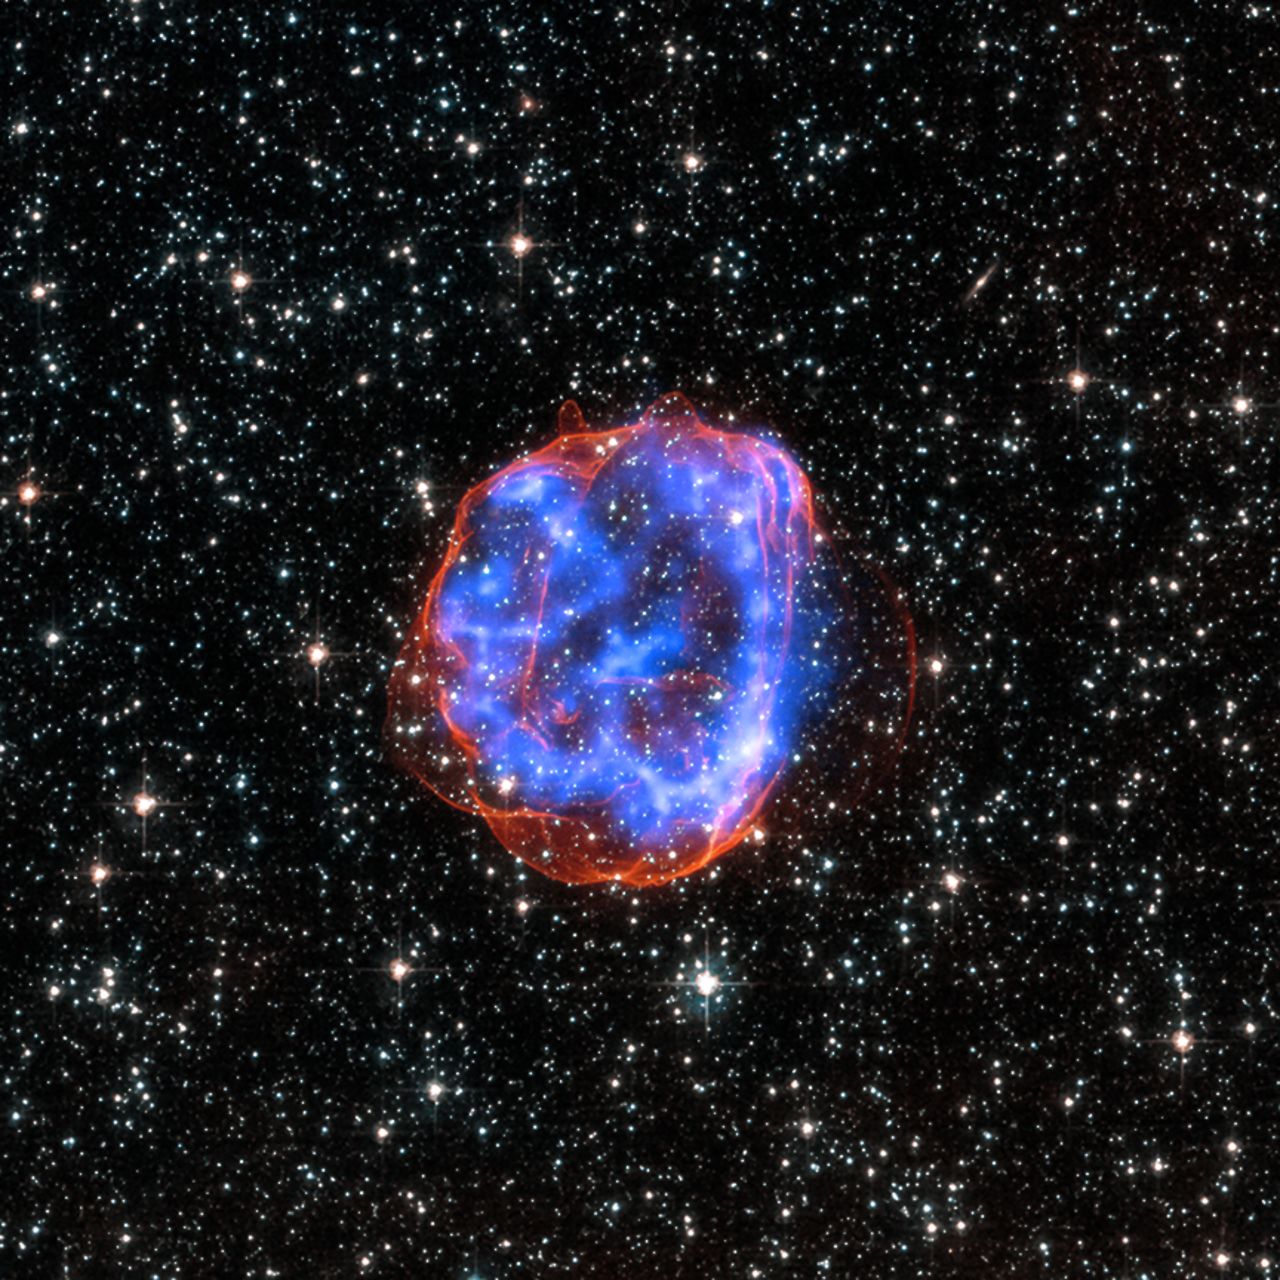 When a massive star exploded in one of our neighboring galaxies, known as the Large Magellanic Cloud, an expanding debris field with the catchy name of SNR 0519-69.0 was left in its wake. In this image, you can actually see the edge of the detonation in red surrounding the multimillion-degree gas captured in blue by the Chandra X-ray observatory.